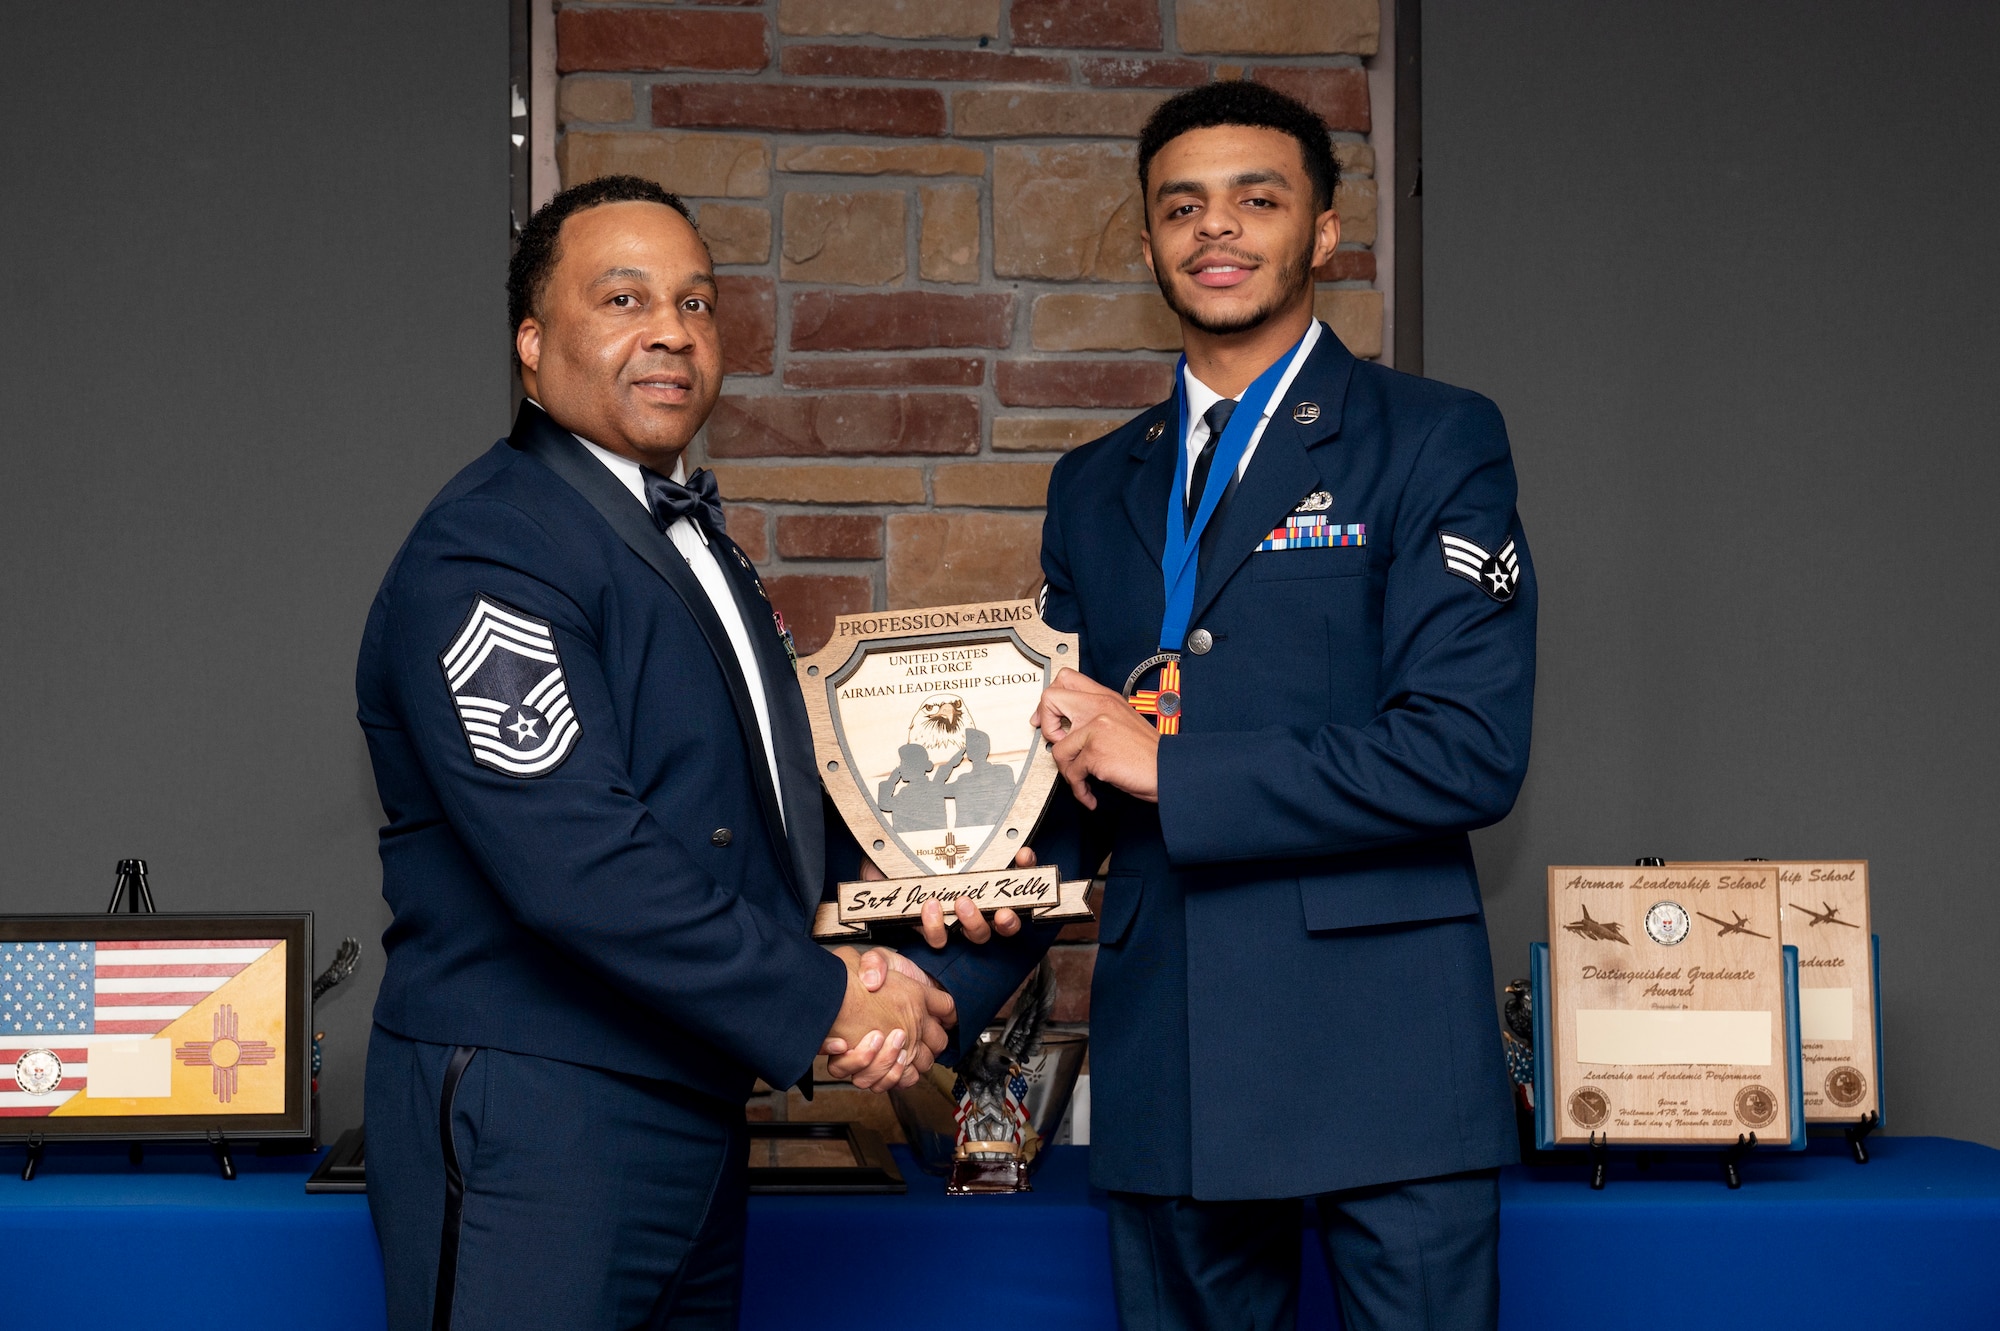 U.S. Air Force Senior Airman Jesimiel Kelly, right, accepts the Profession of Arms Award from Chief Master Sgt. Tyrell McClora, during the graduation of Joel C. Mayo ALS Class 24-A at Holloman Air Force Base, New Mexico, Nov. 2, 2023. The profession of arms award recognizes the student who most embodies the profession of arms, which is demonstrated with a comprehensive understanding of the warrior ethos, oath of enlistment, and the airman’s creed. (U.S. Air Force photo by Airman 1st Class Michelle Ferrari)